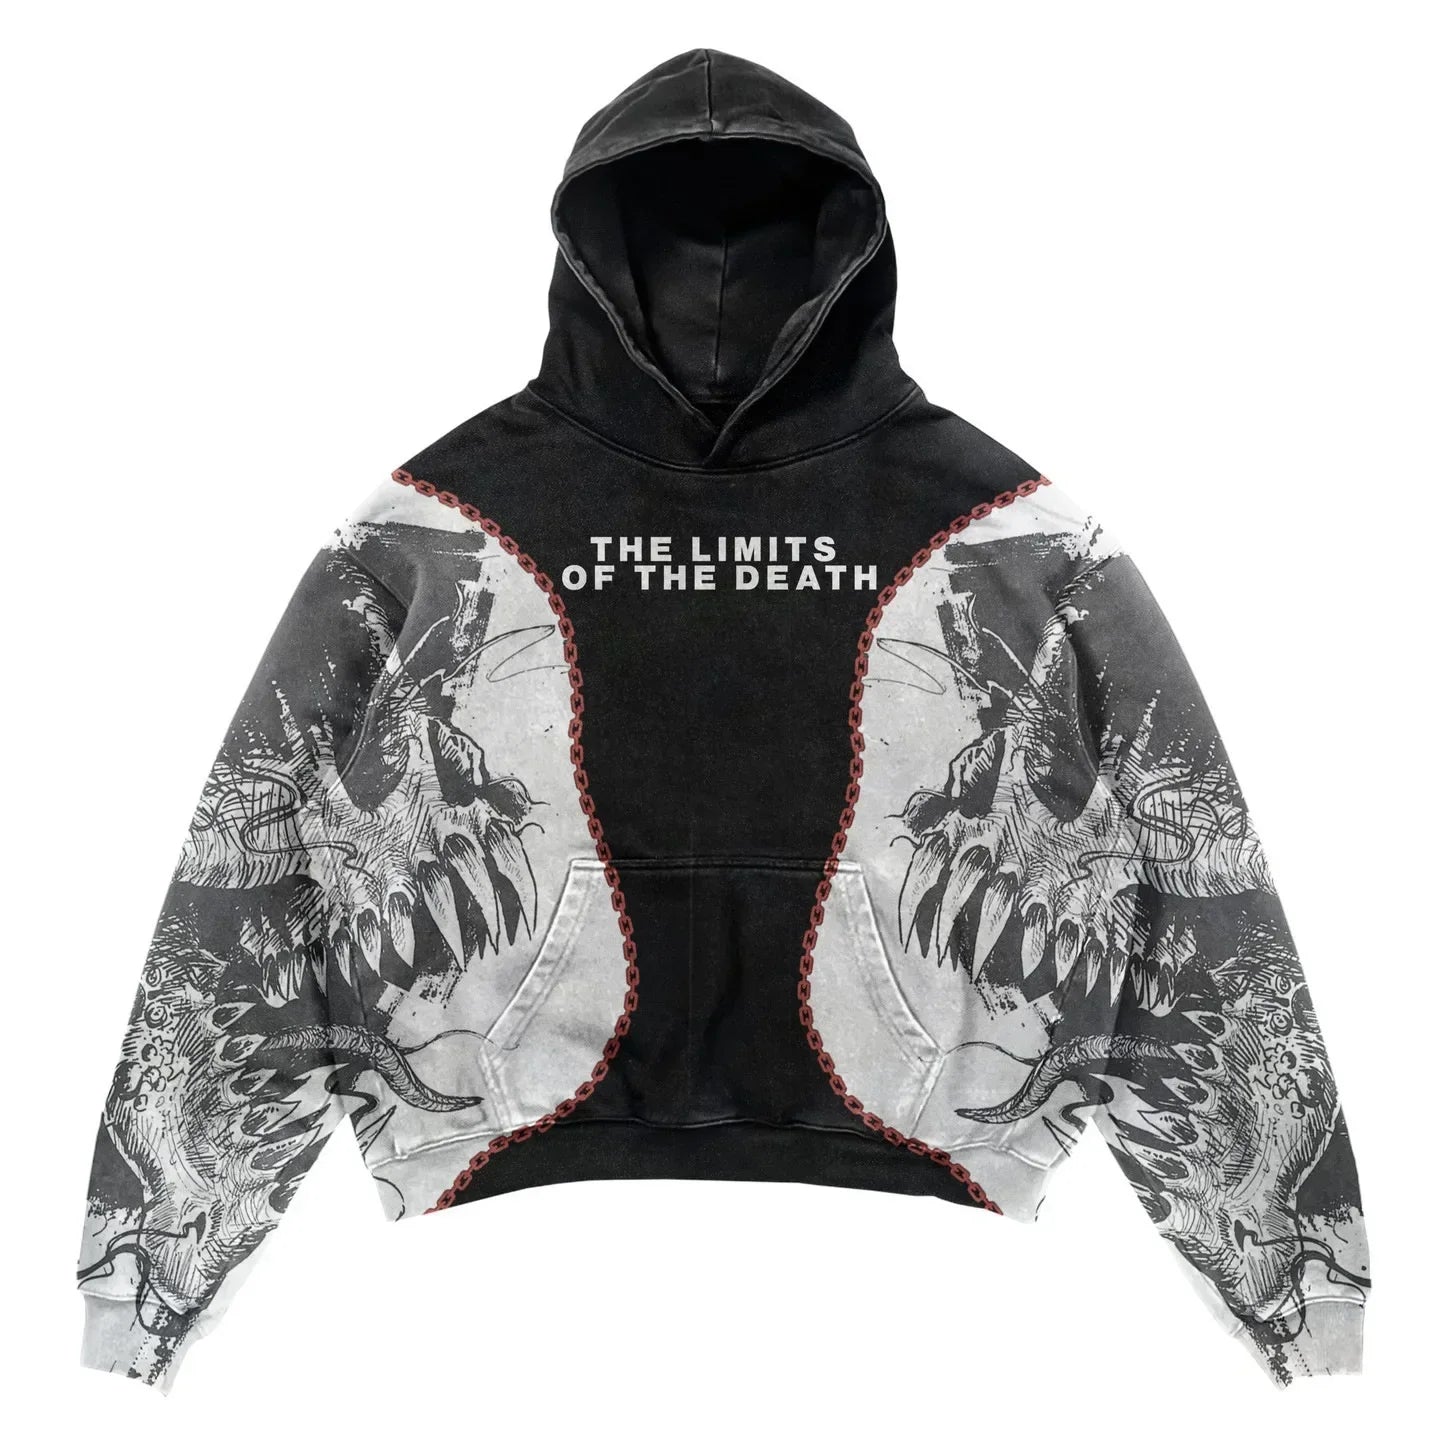 Explosions Printed Skull Y2K Retro Hooded Sweater Coat Street Style Gothic Casual Fashion Hooded Sweater Men's Female with a graphic design of abstract skulls and the text "THE LIMITS OF THE DEATH" on the front. This punk style features red and white accents, crafted from durable polyester. Brand: Maramalive™